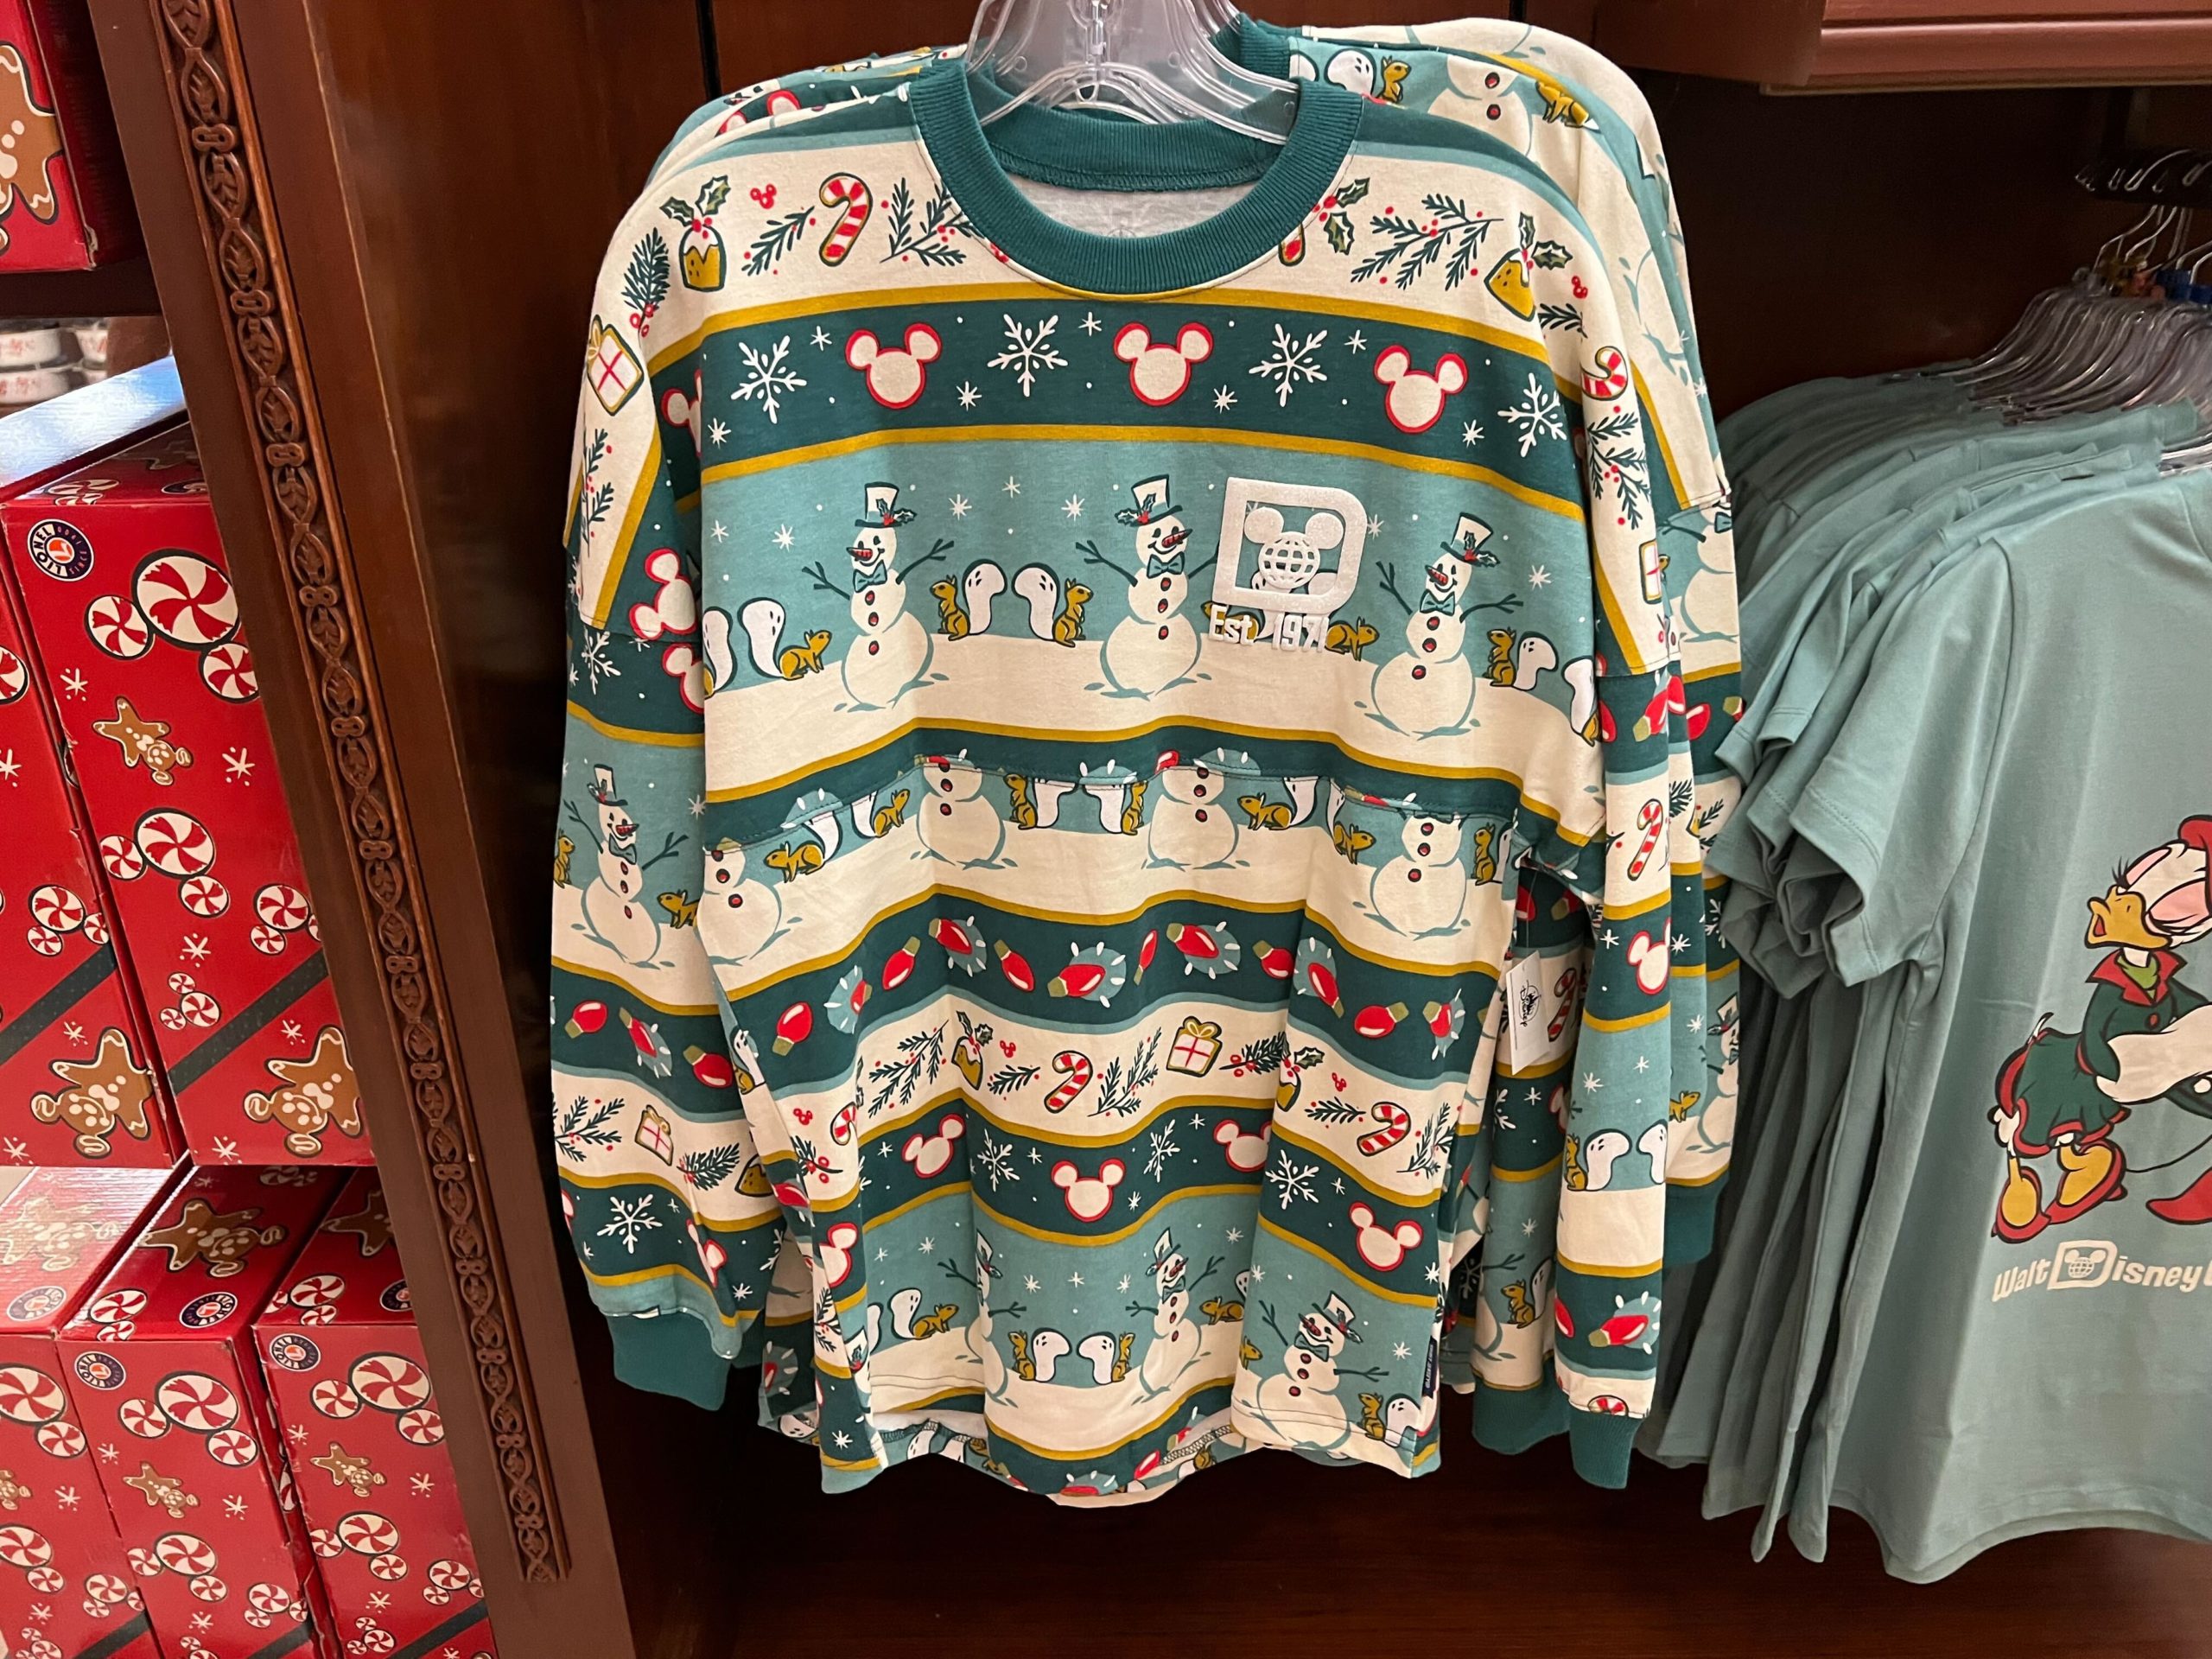 WDW holiday design spirit jersey overview